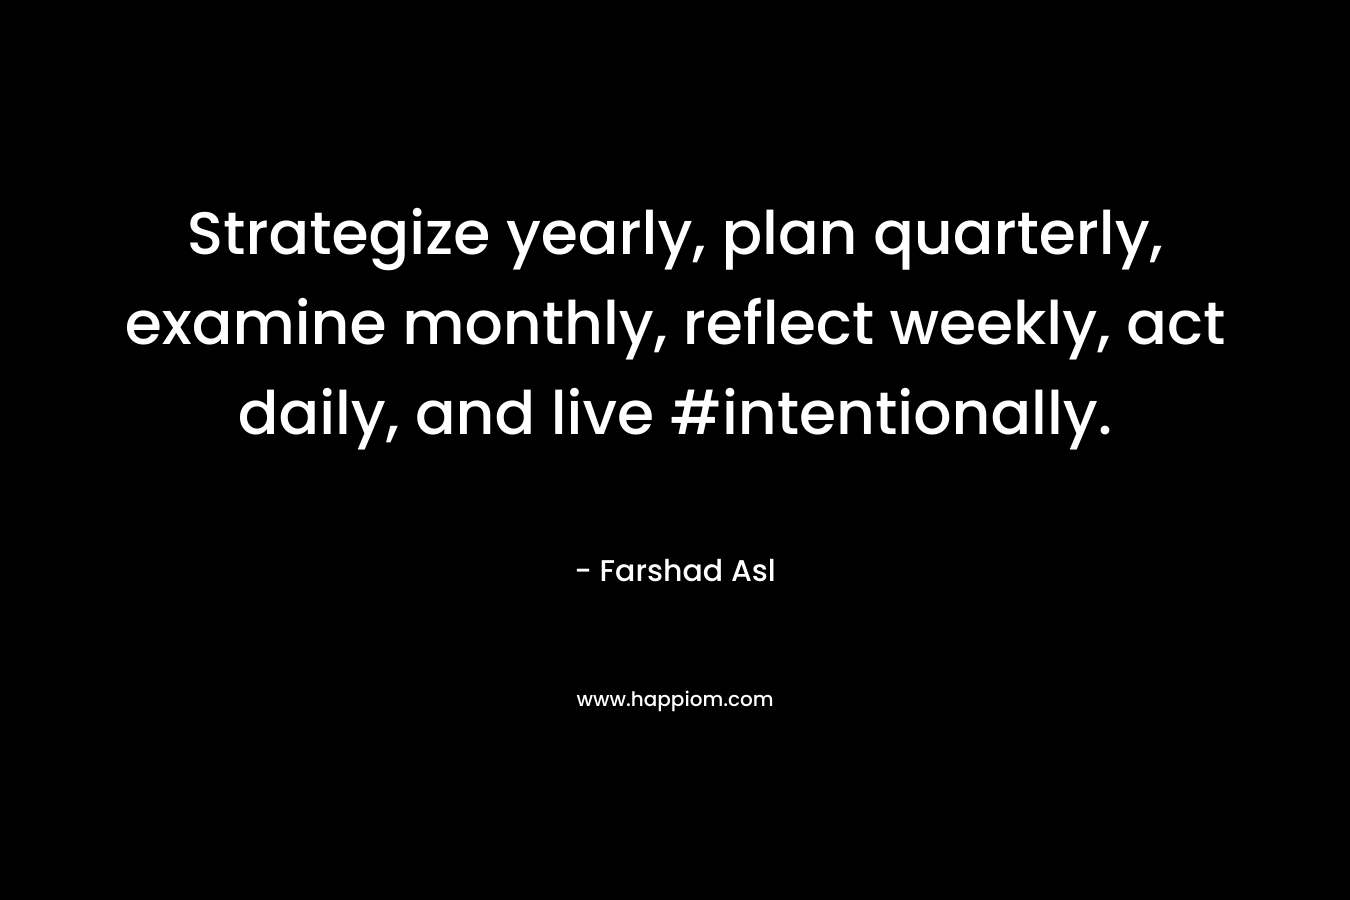 Strategize yearly, plan quarterly, examine monthly, reflect weekly, act daily, and live #intentionally. – Farshad Asl